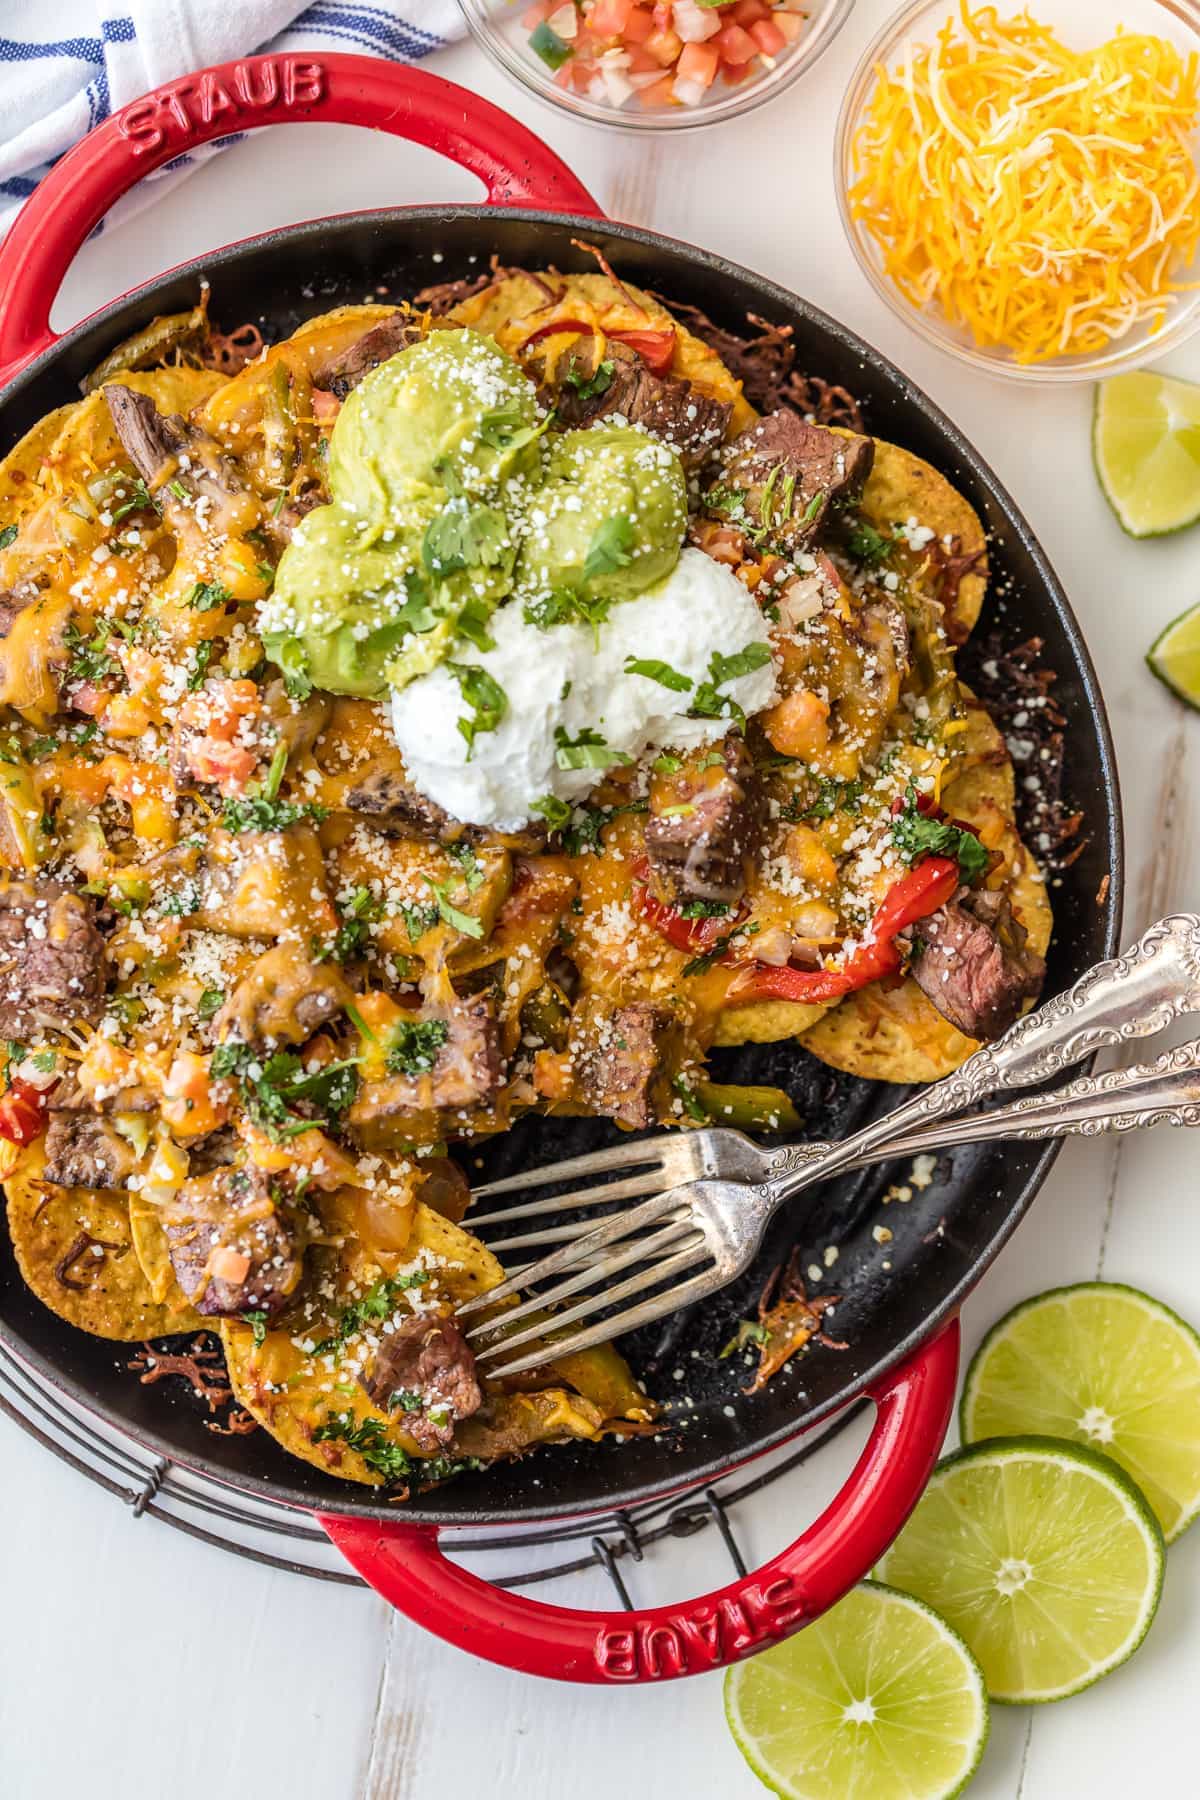 SKILLET STEAK FAJITA NACHOS are a must make for tailgating, the Super Bowl, or anytime! Loaded with marinated steak, peppers, onion, and cheese! BEST NACHOS EVER!